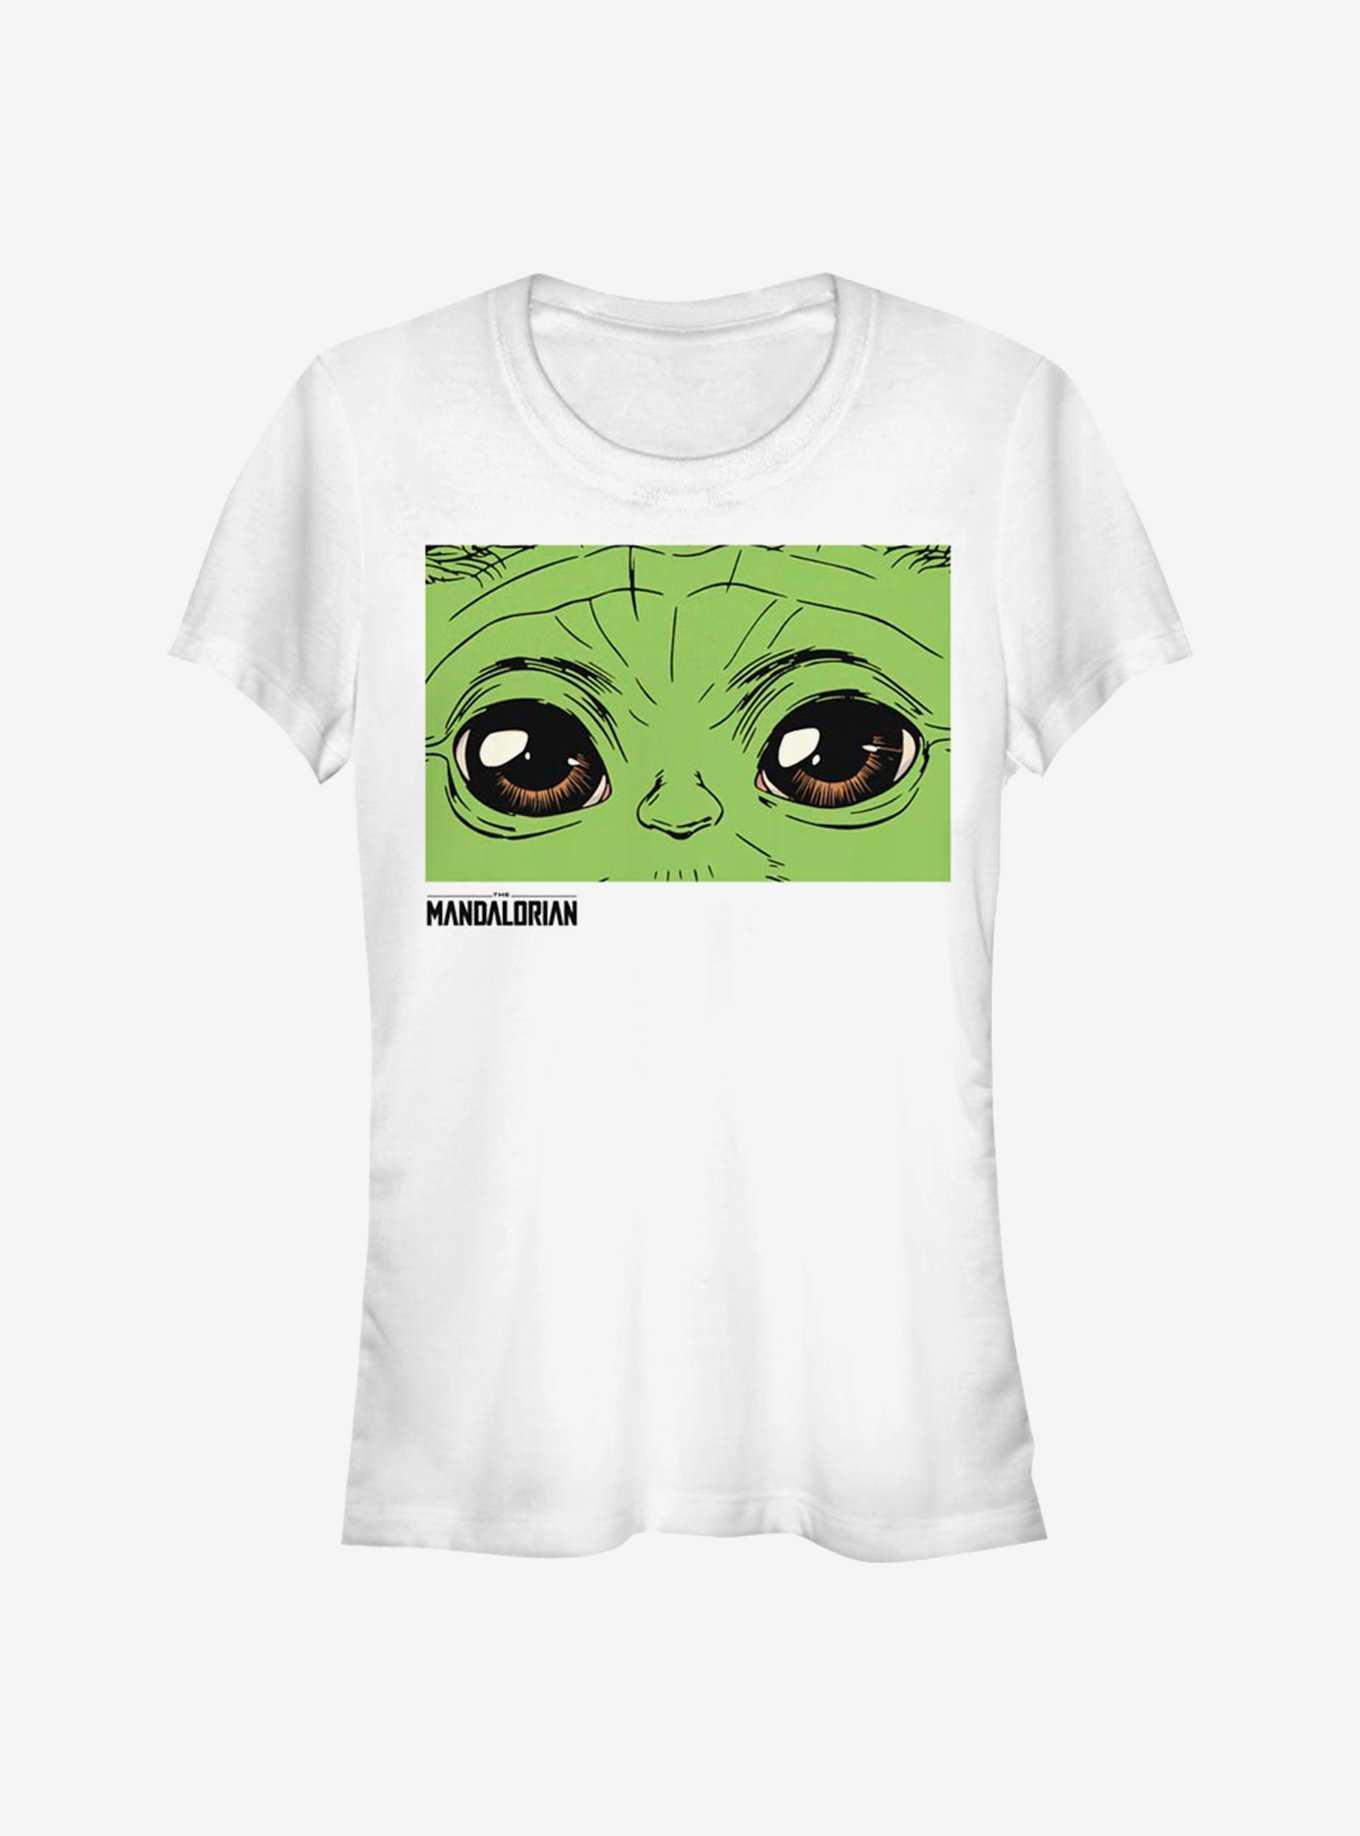 Star Wars The Mandalorian The Child These Eyes Girls T-Shirt, , hi-res